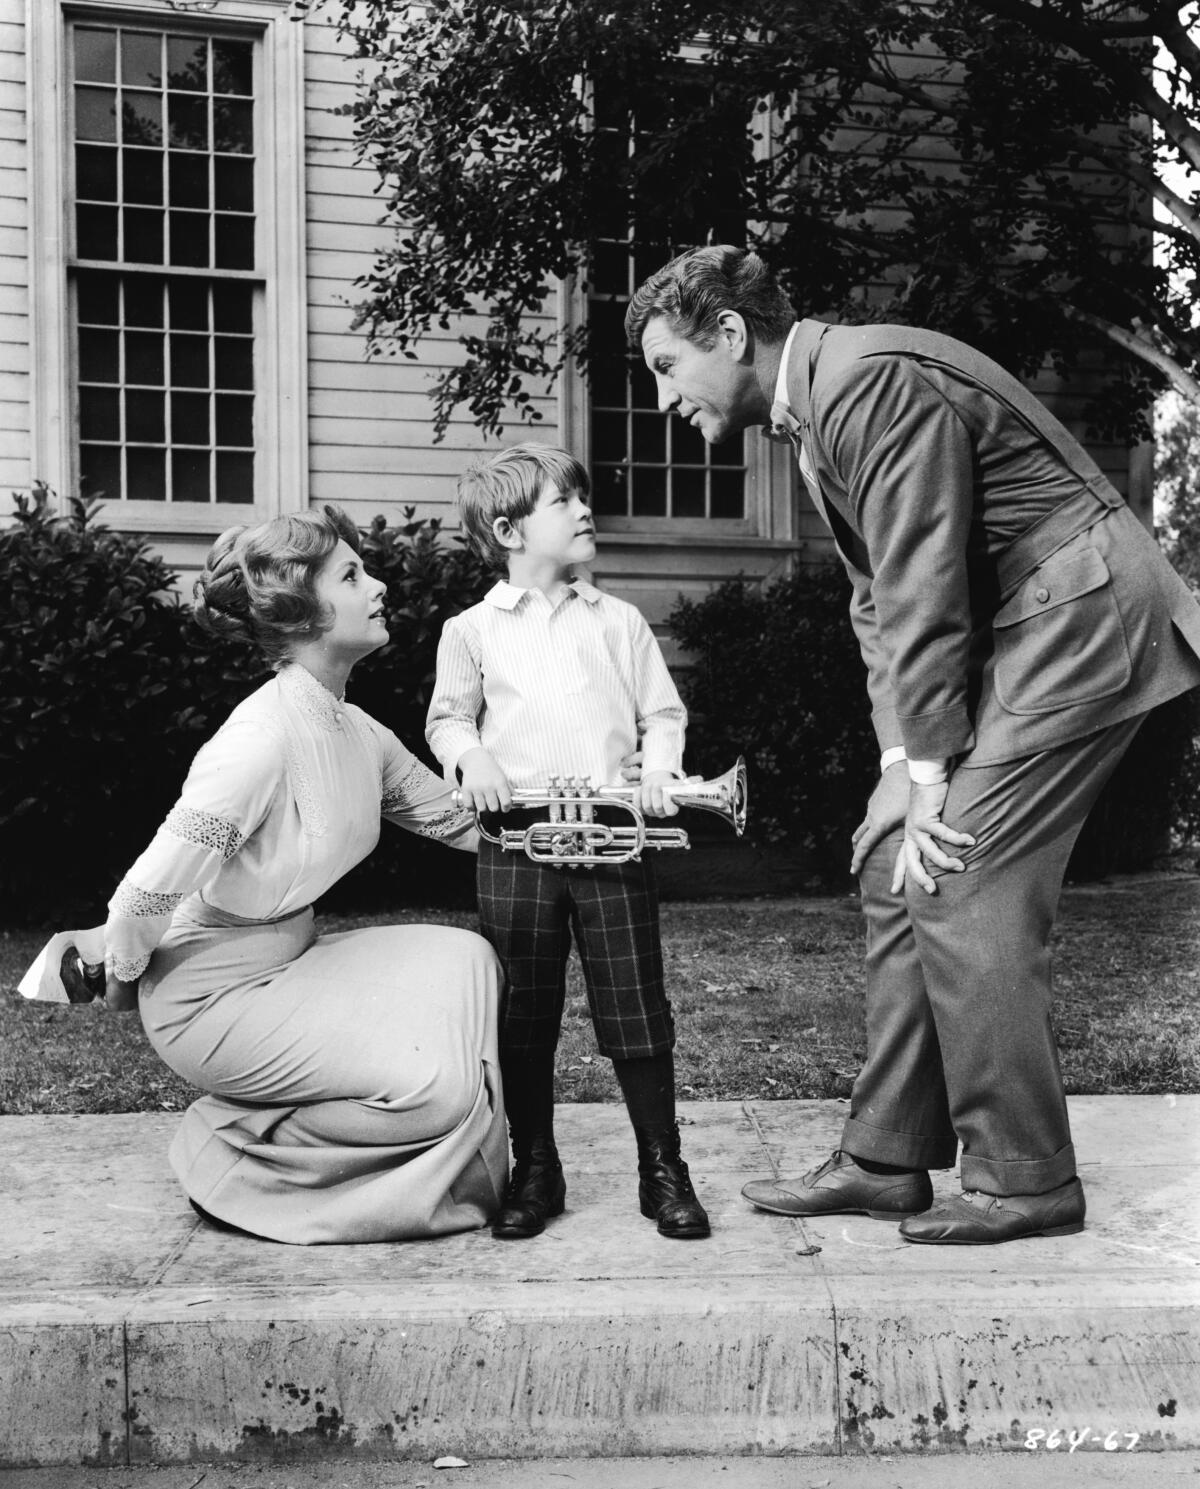 A little boy holds a trumpet while a woman crouches next to him, left, and a man, right, bends down to talk to them